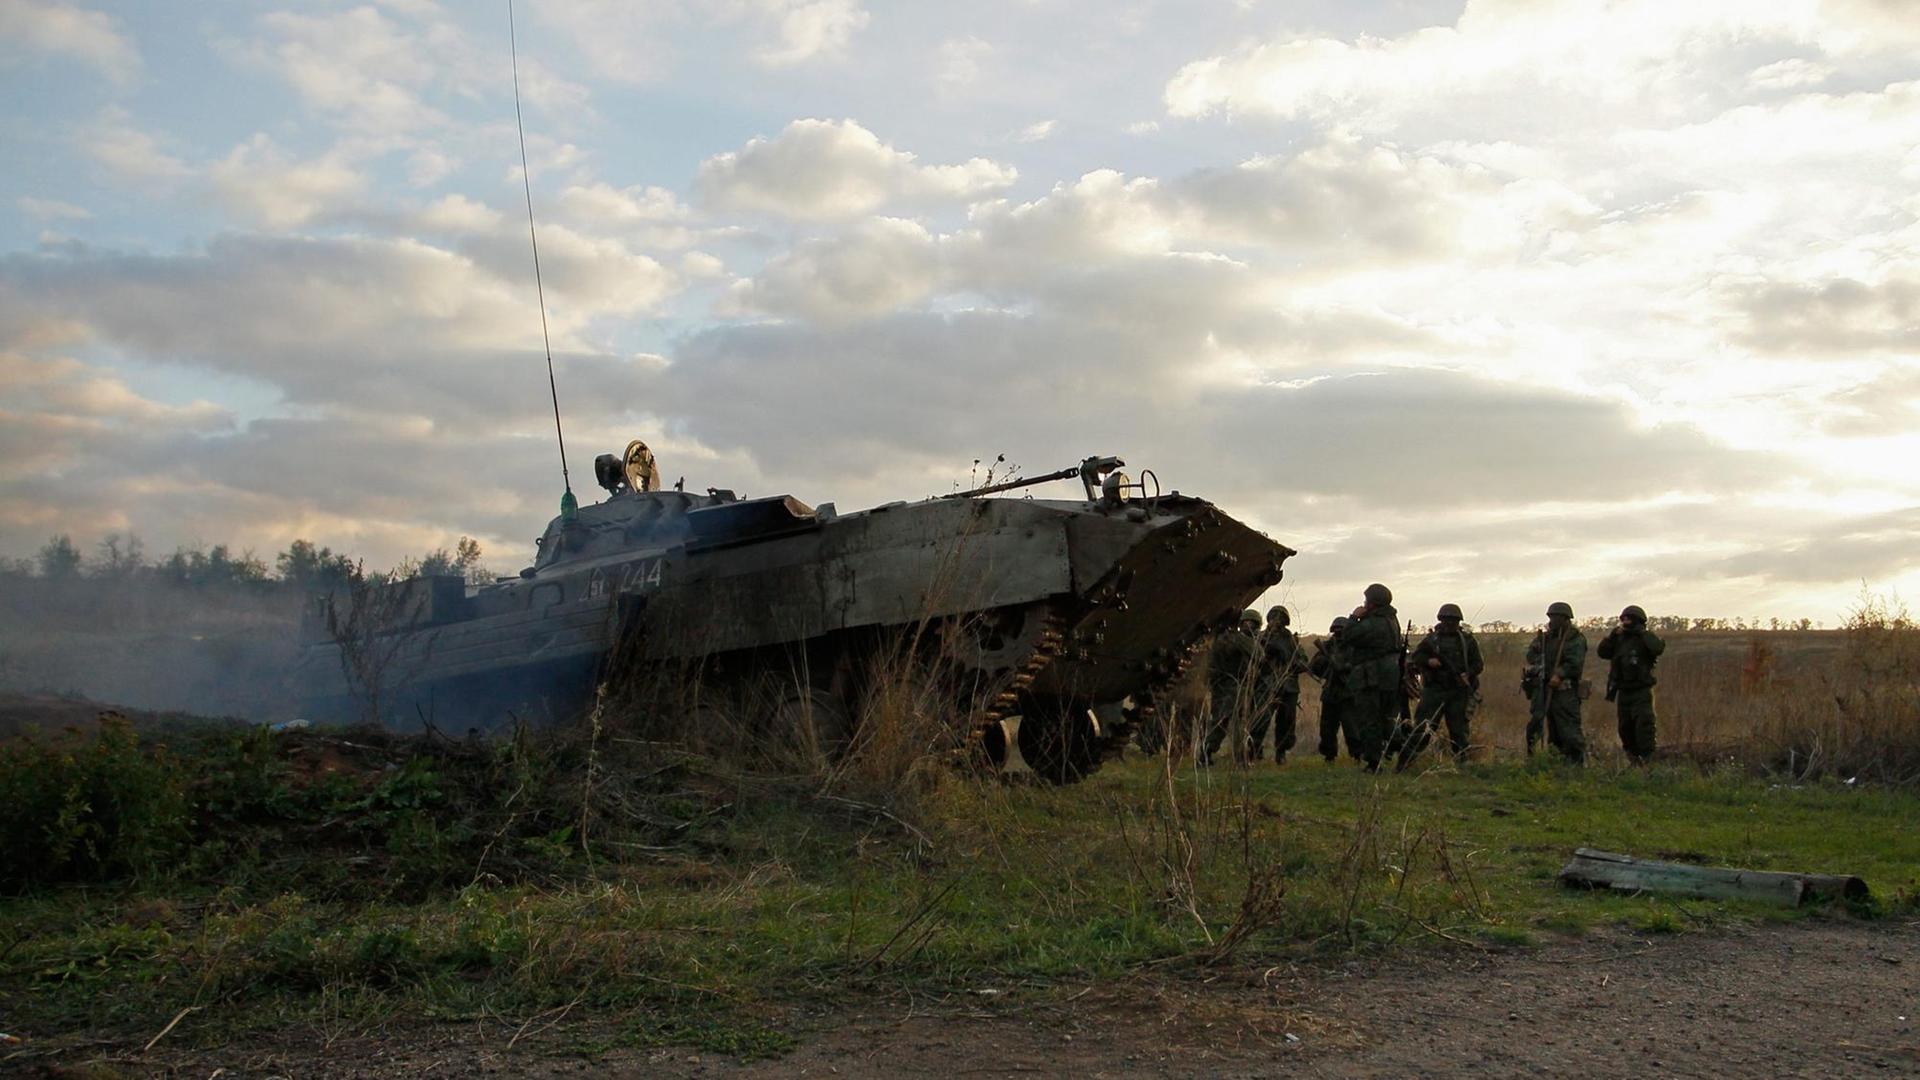 epa05568812 Pro-Russian rebel troops leave their positions during the withdrawal of forces from the front line in Petrovske village, about 50 km from Donetsk, Ukraine, 03 October 2016. Both Ukrain's army and the Russian-backed separatists announced on 01 October the withdrawal of their forces from Petrovske, as part of the demilitarisation agreement signed in September.